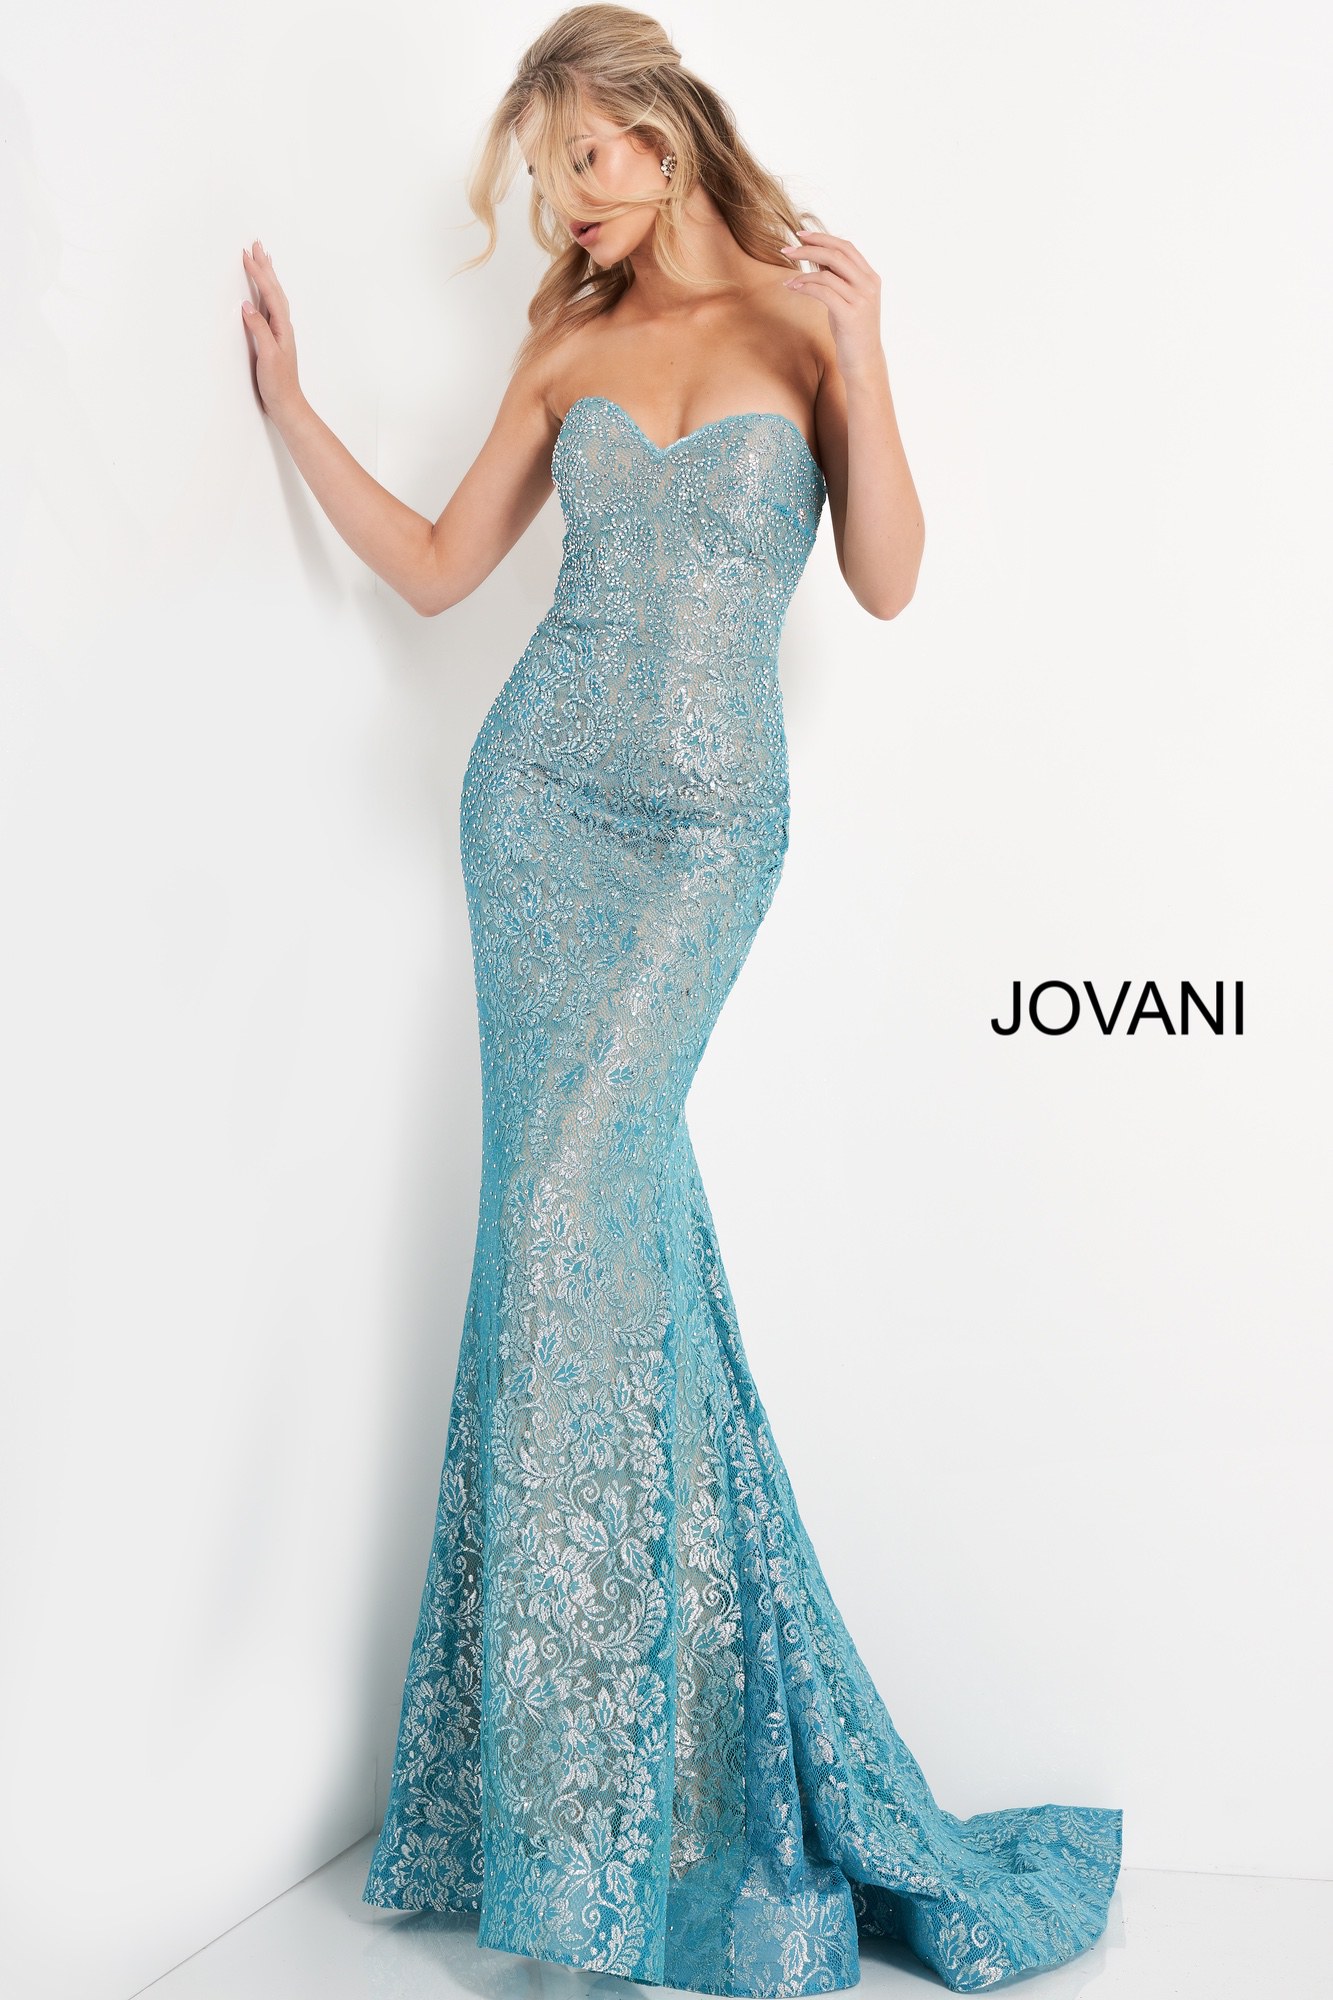 Jovani 06586 Turquoise Silver Tie Back Fitted Prom Dress